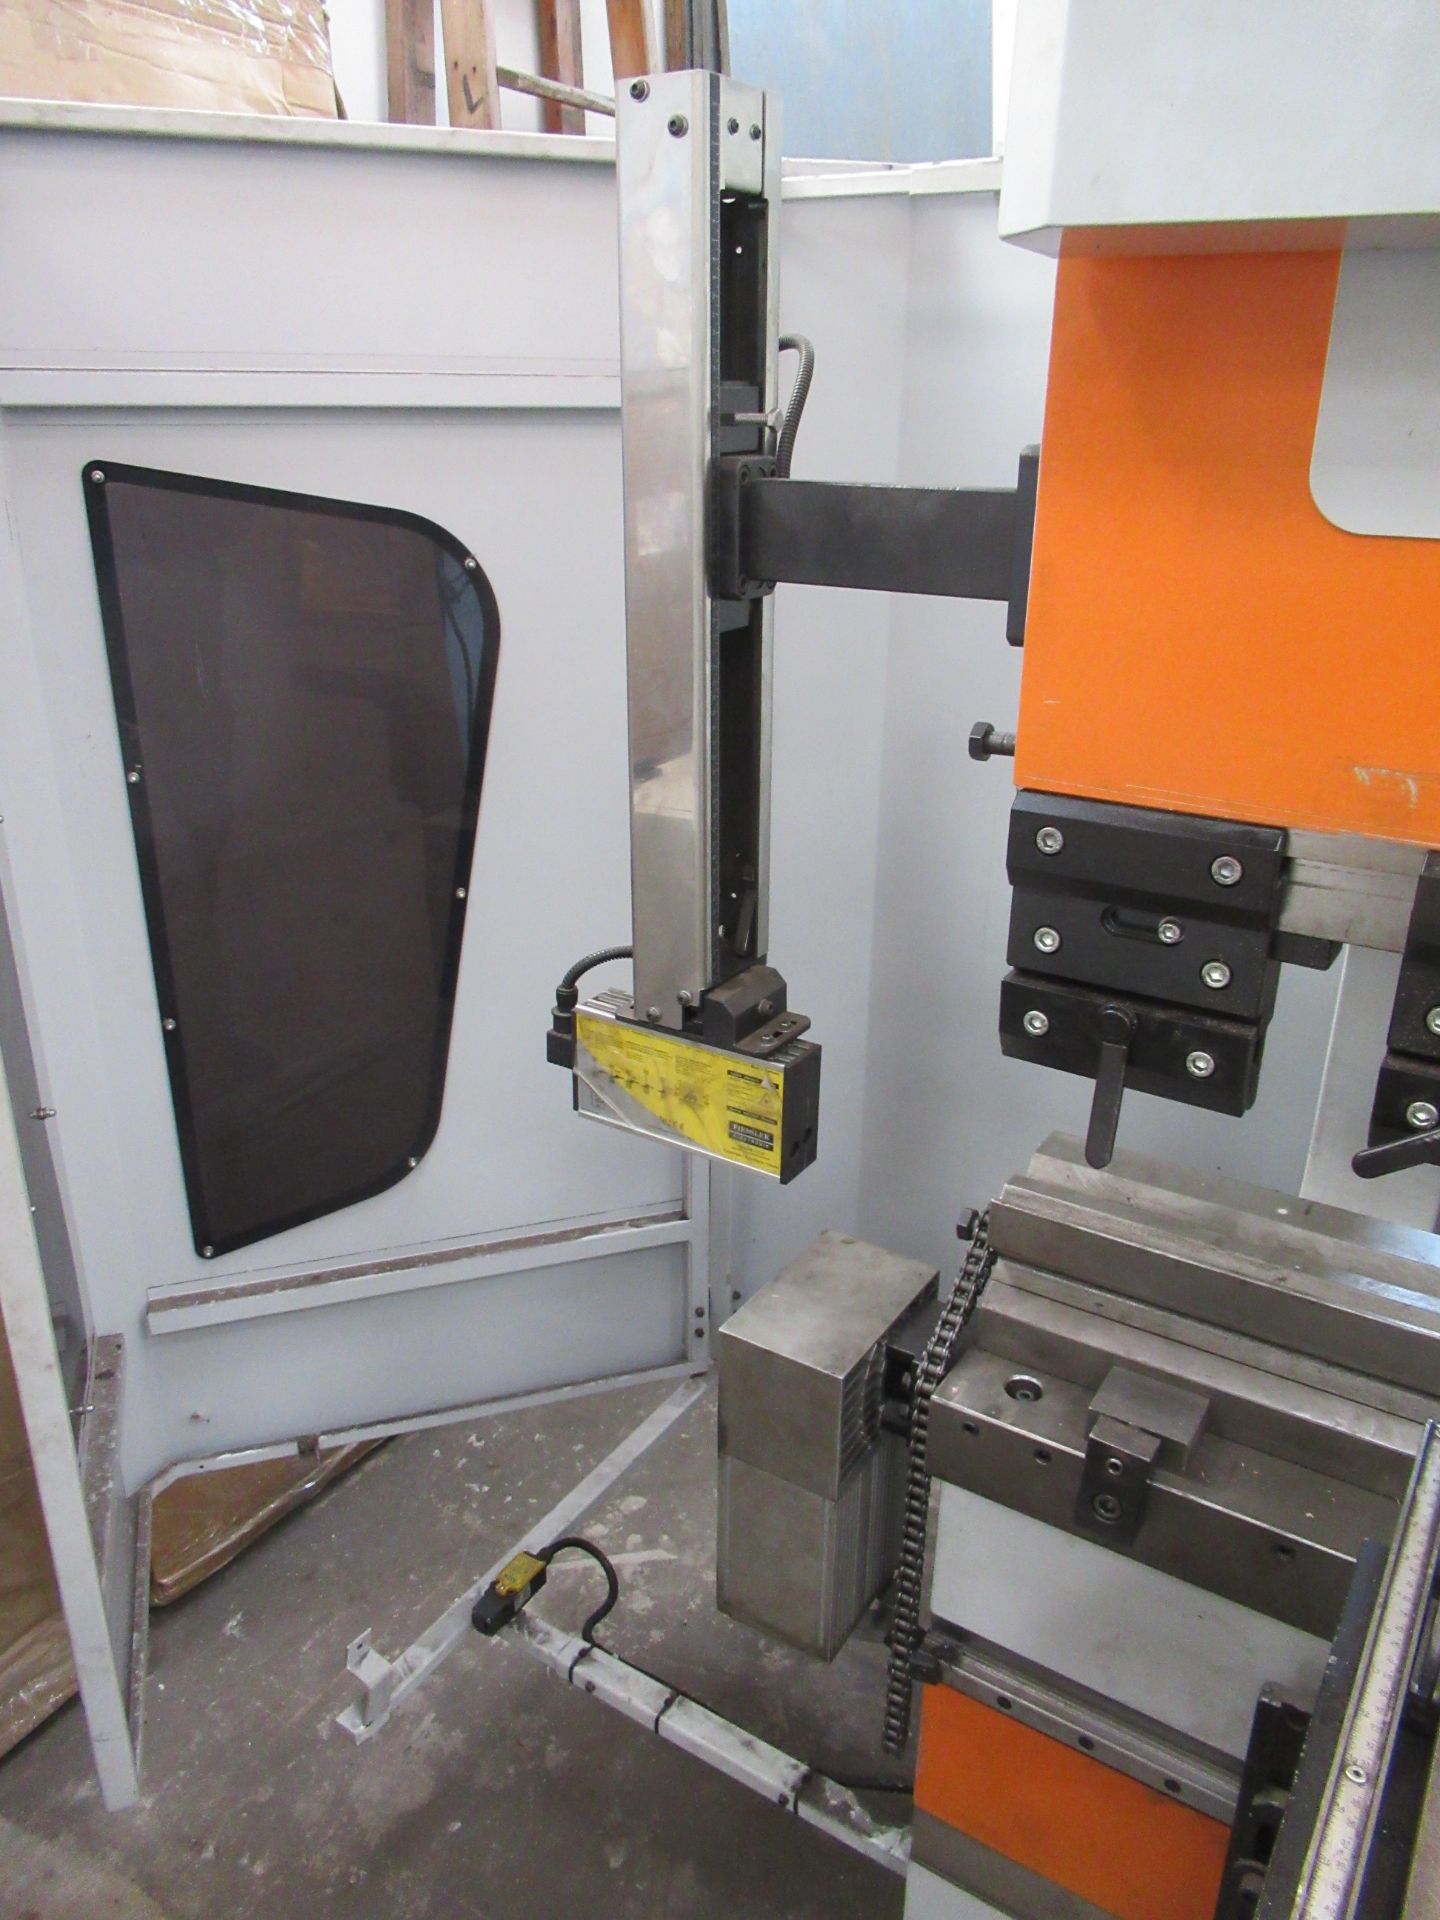 Ermaksan Speed-bend Pro 4100 x 220 CNC Hydraulic Press Brake and a selection of tooling for press br - Image 14 of 16